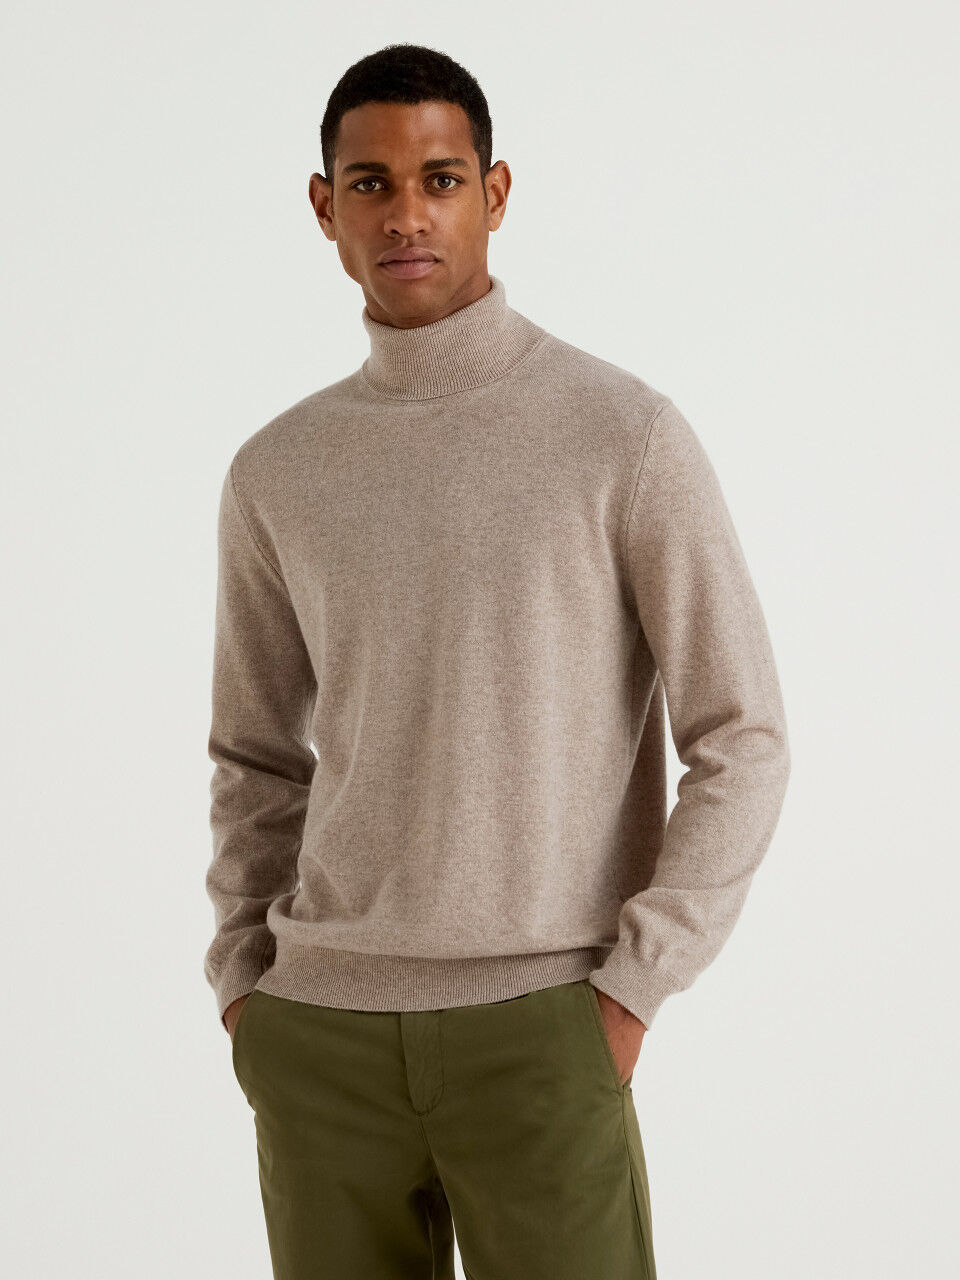 rand wagon uitzondering Men's High Neck Sweaters New Collection 2023 | Benetton